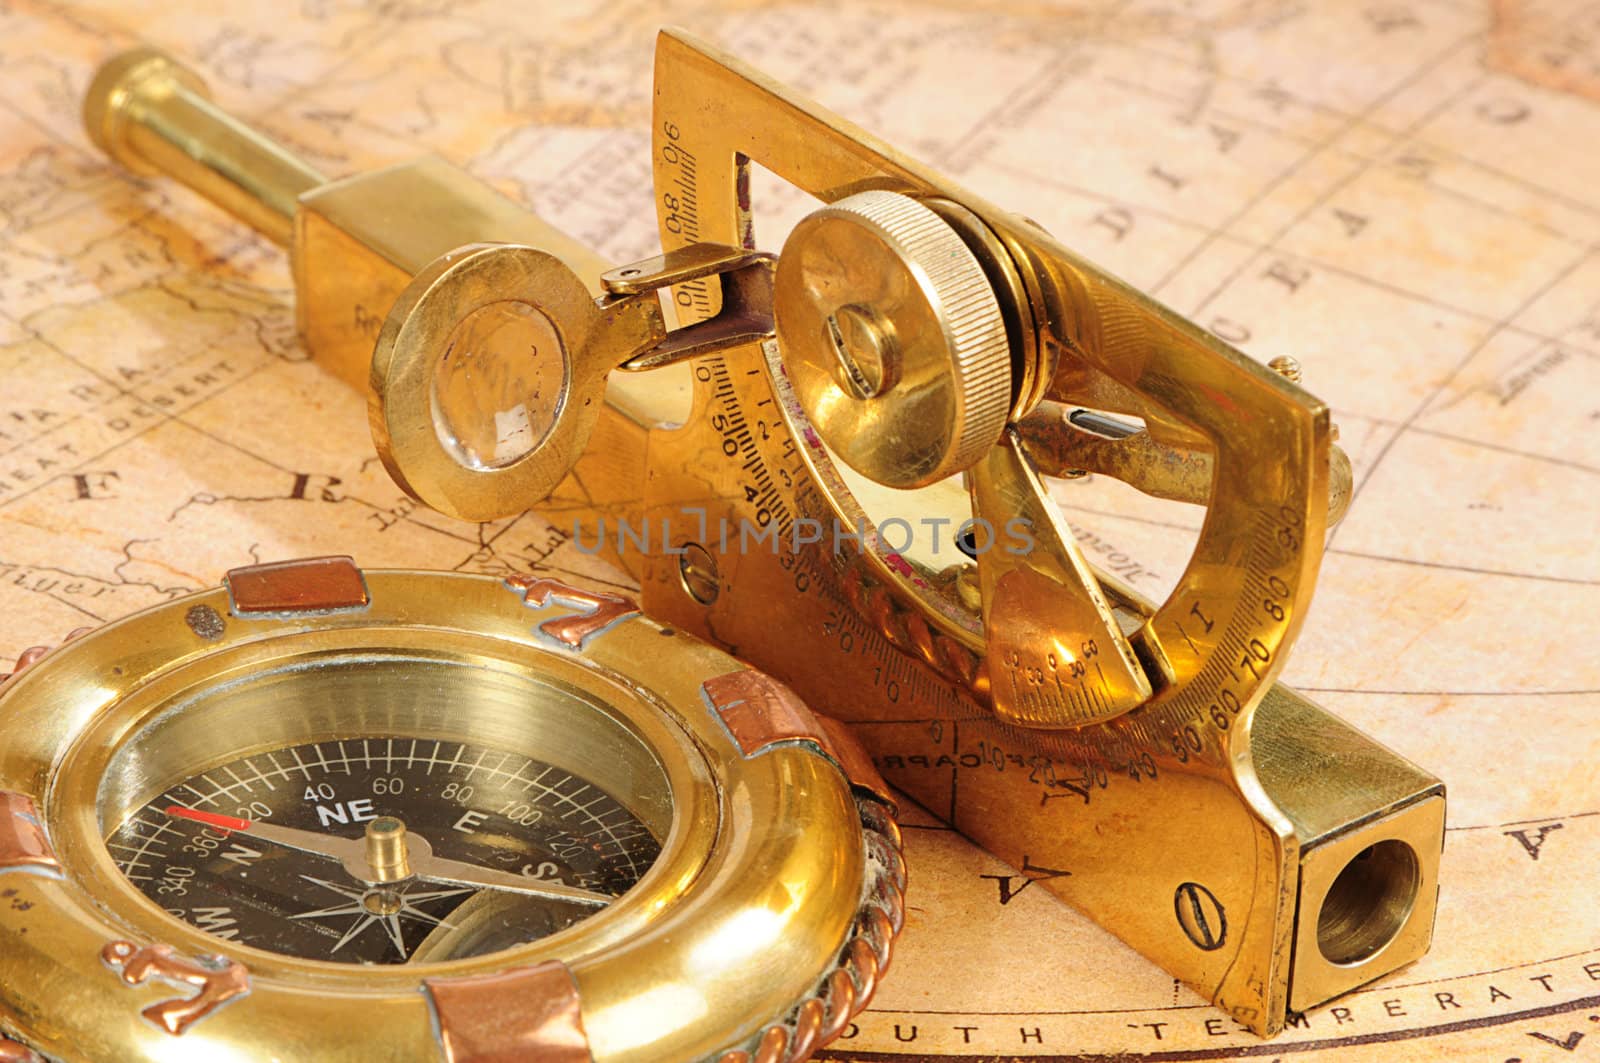 old-fashioned navigation devices by dyoma